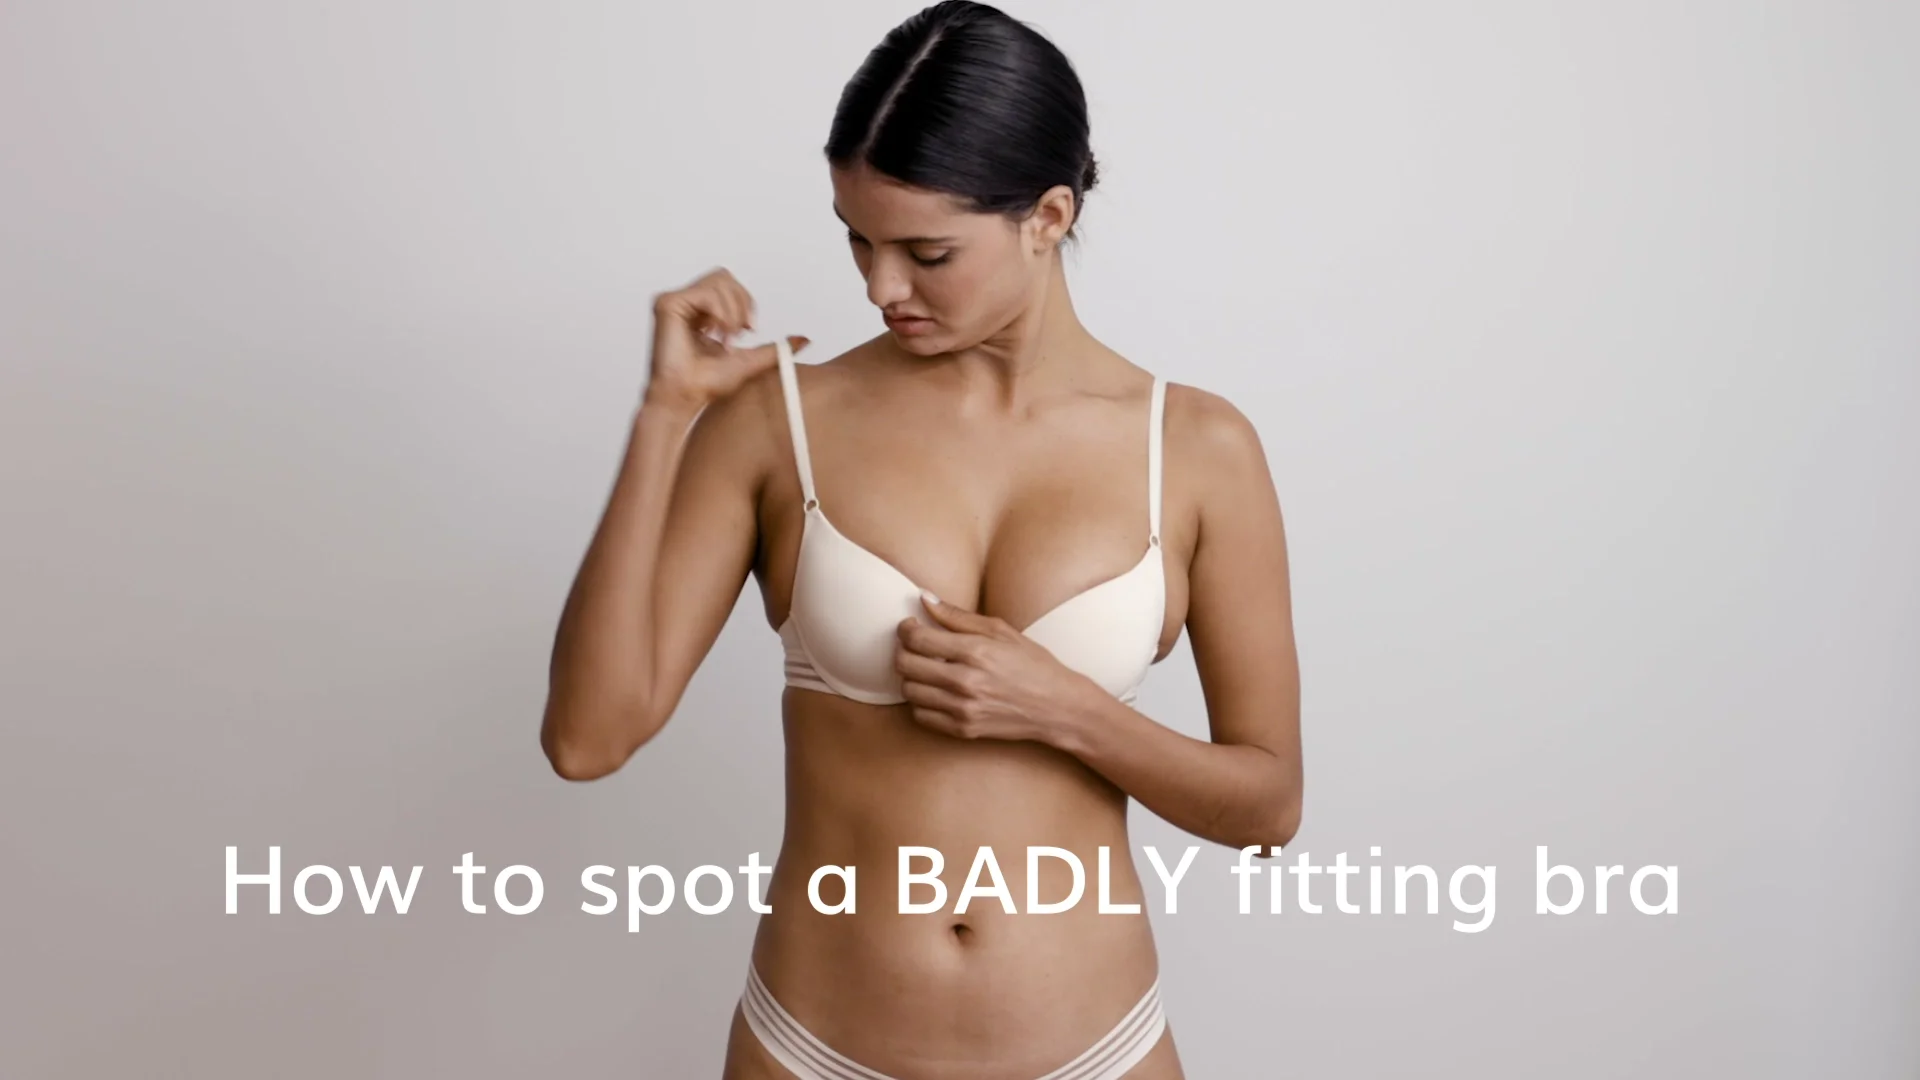 How to spot a Badly fitting bra on Vimeo